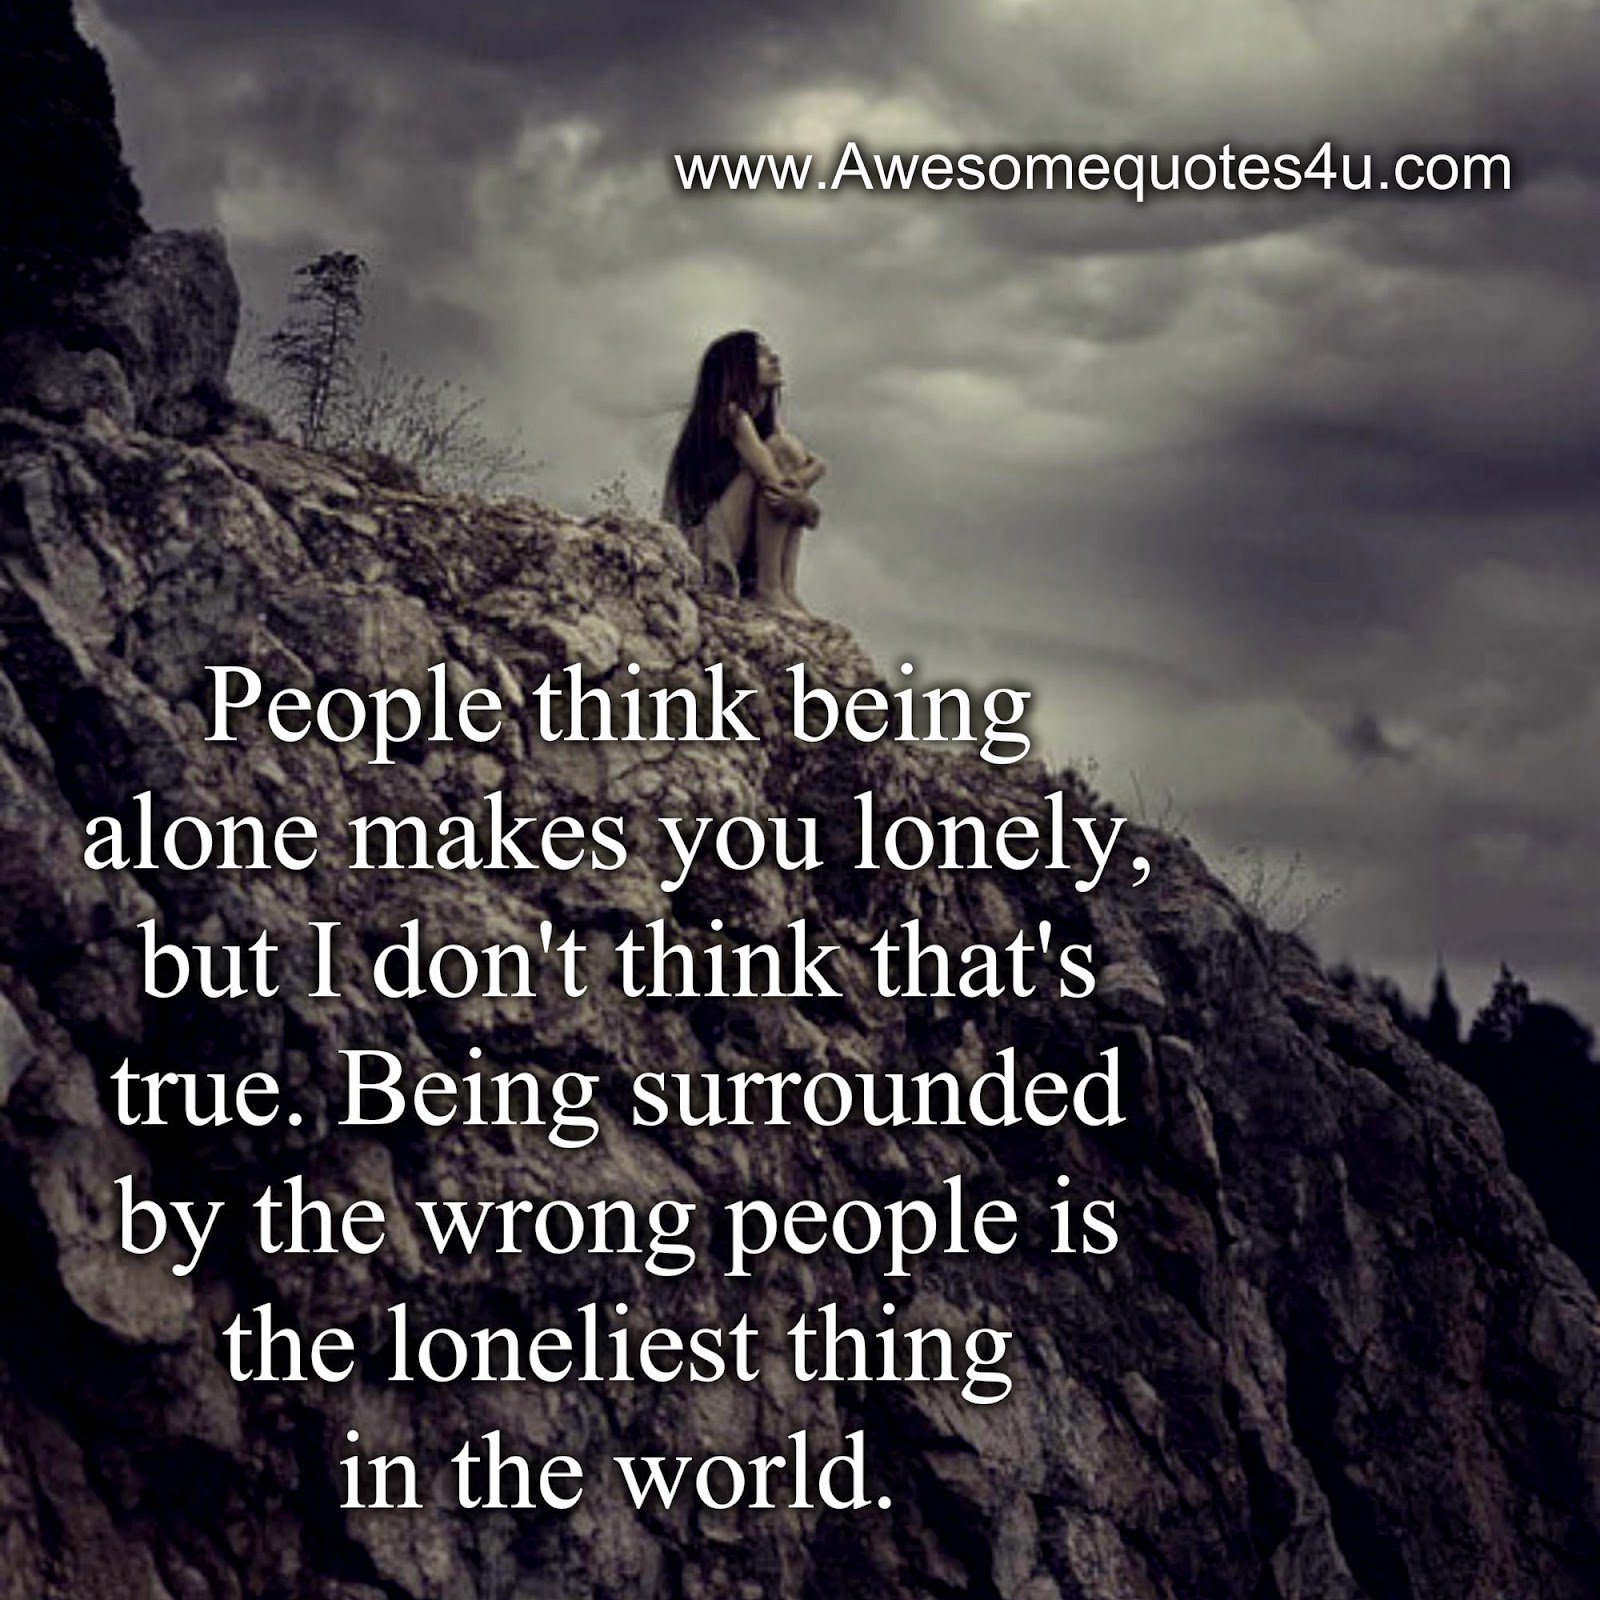 Awesome Quotes People think being alone makes you lonely